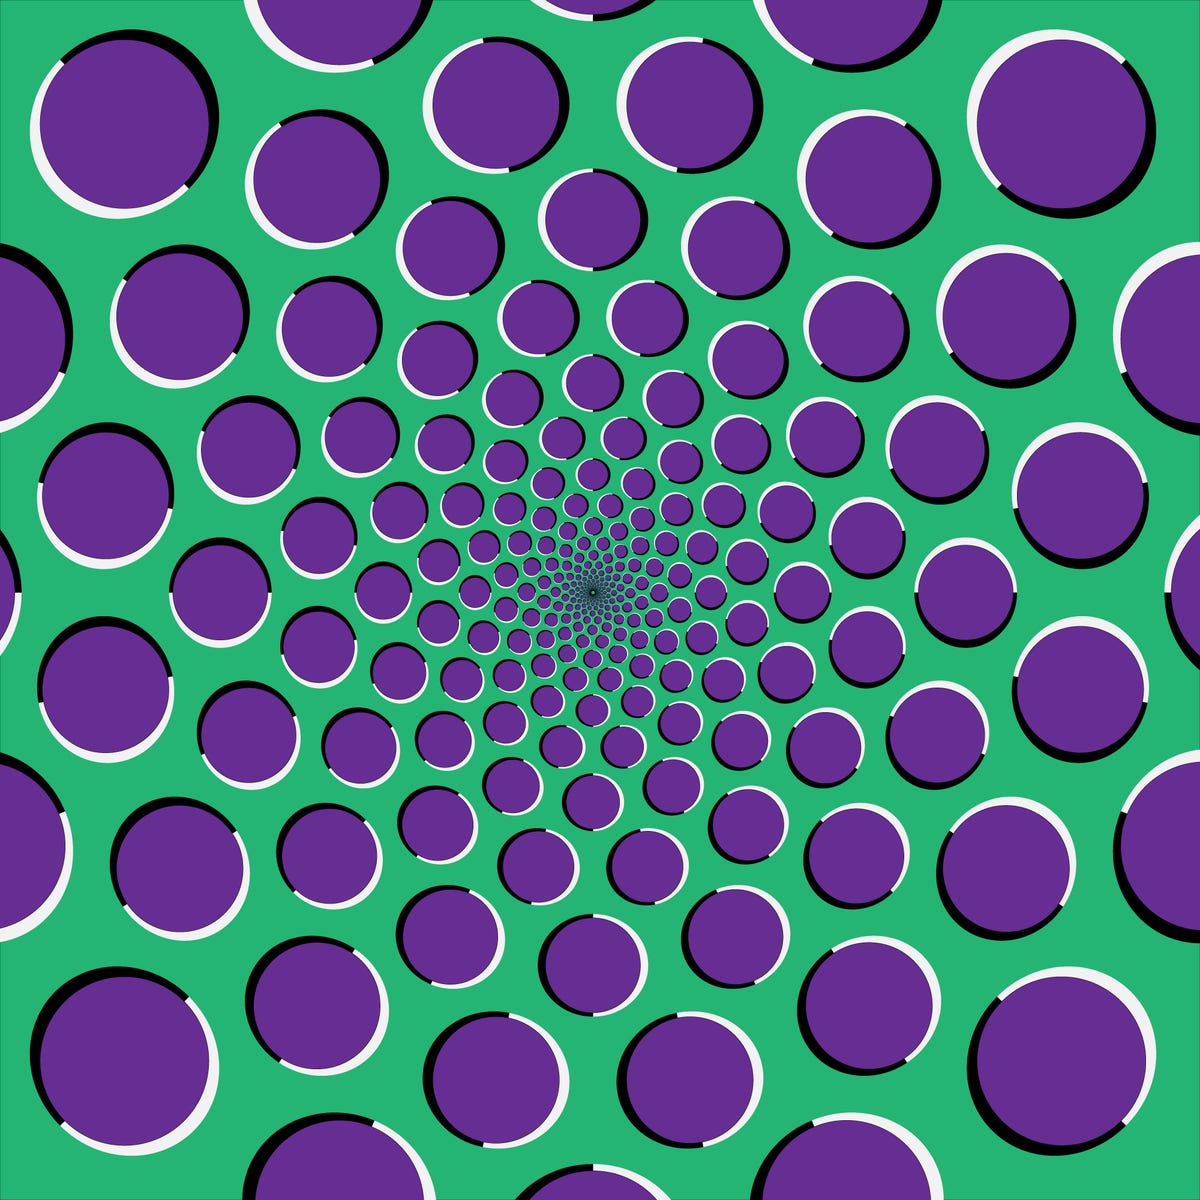 Purple dots moving in spiral motion on a green background.